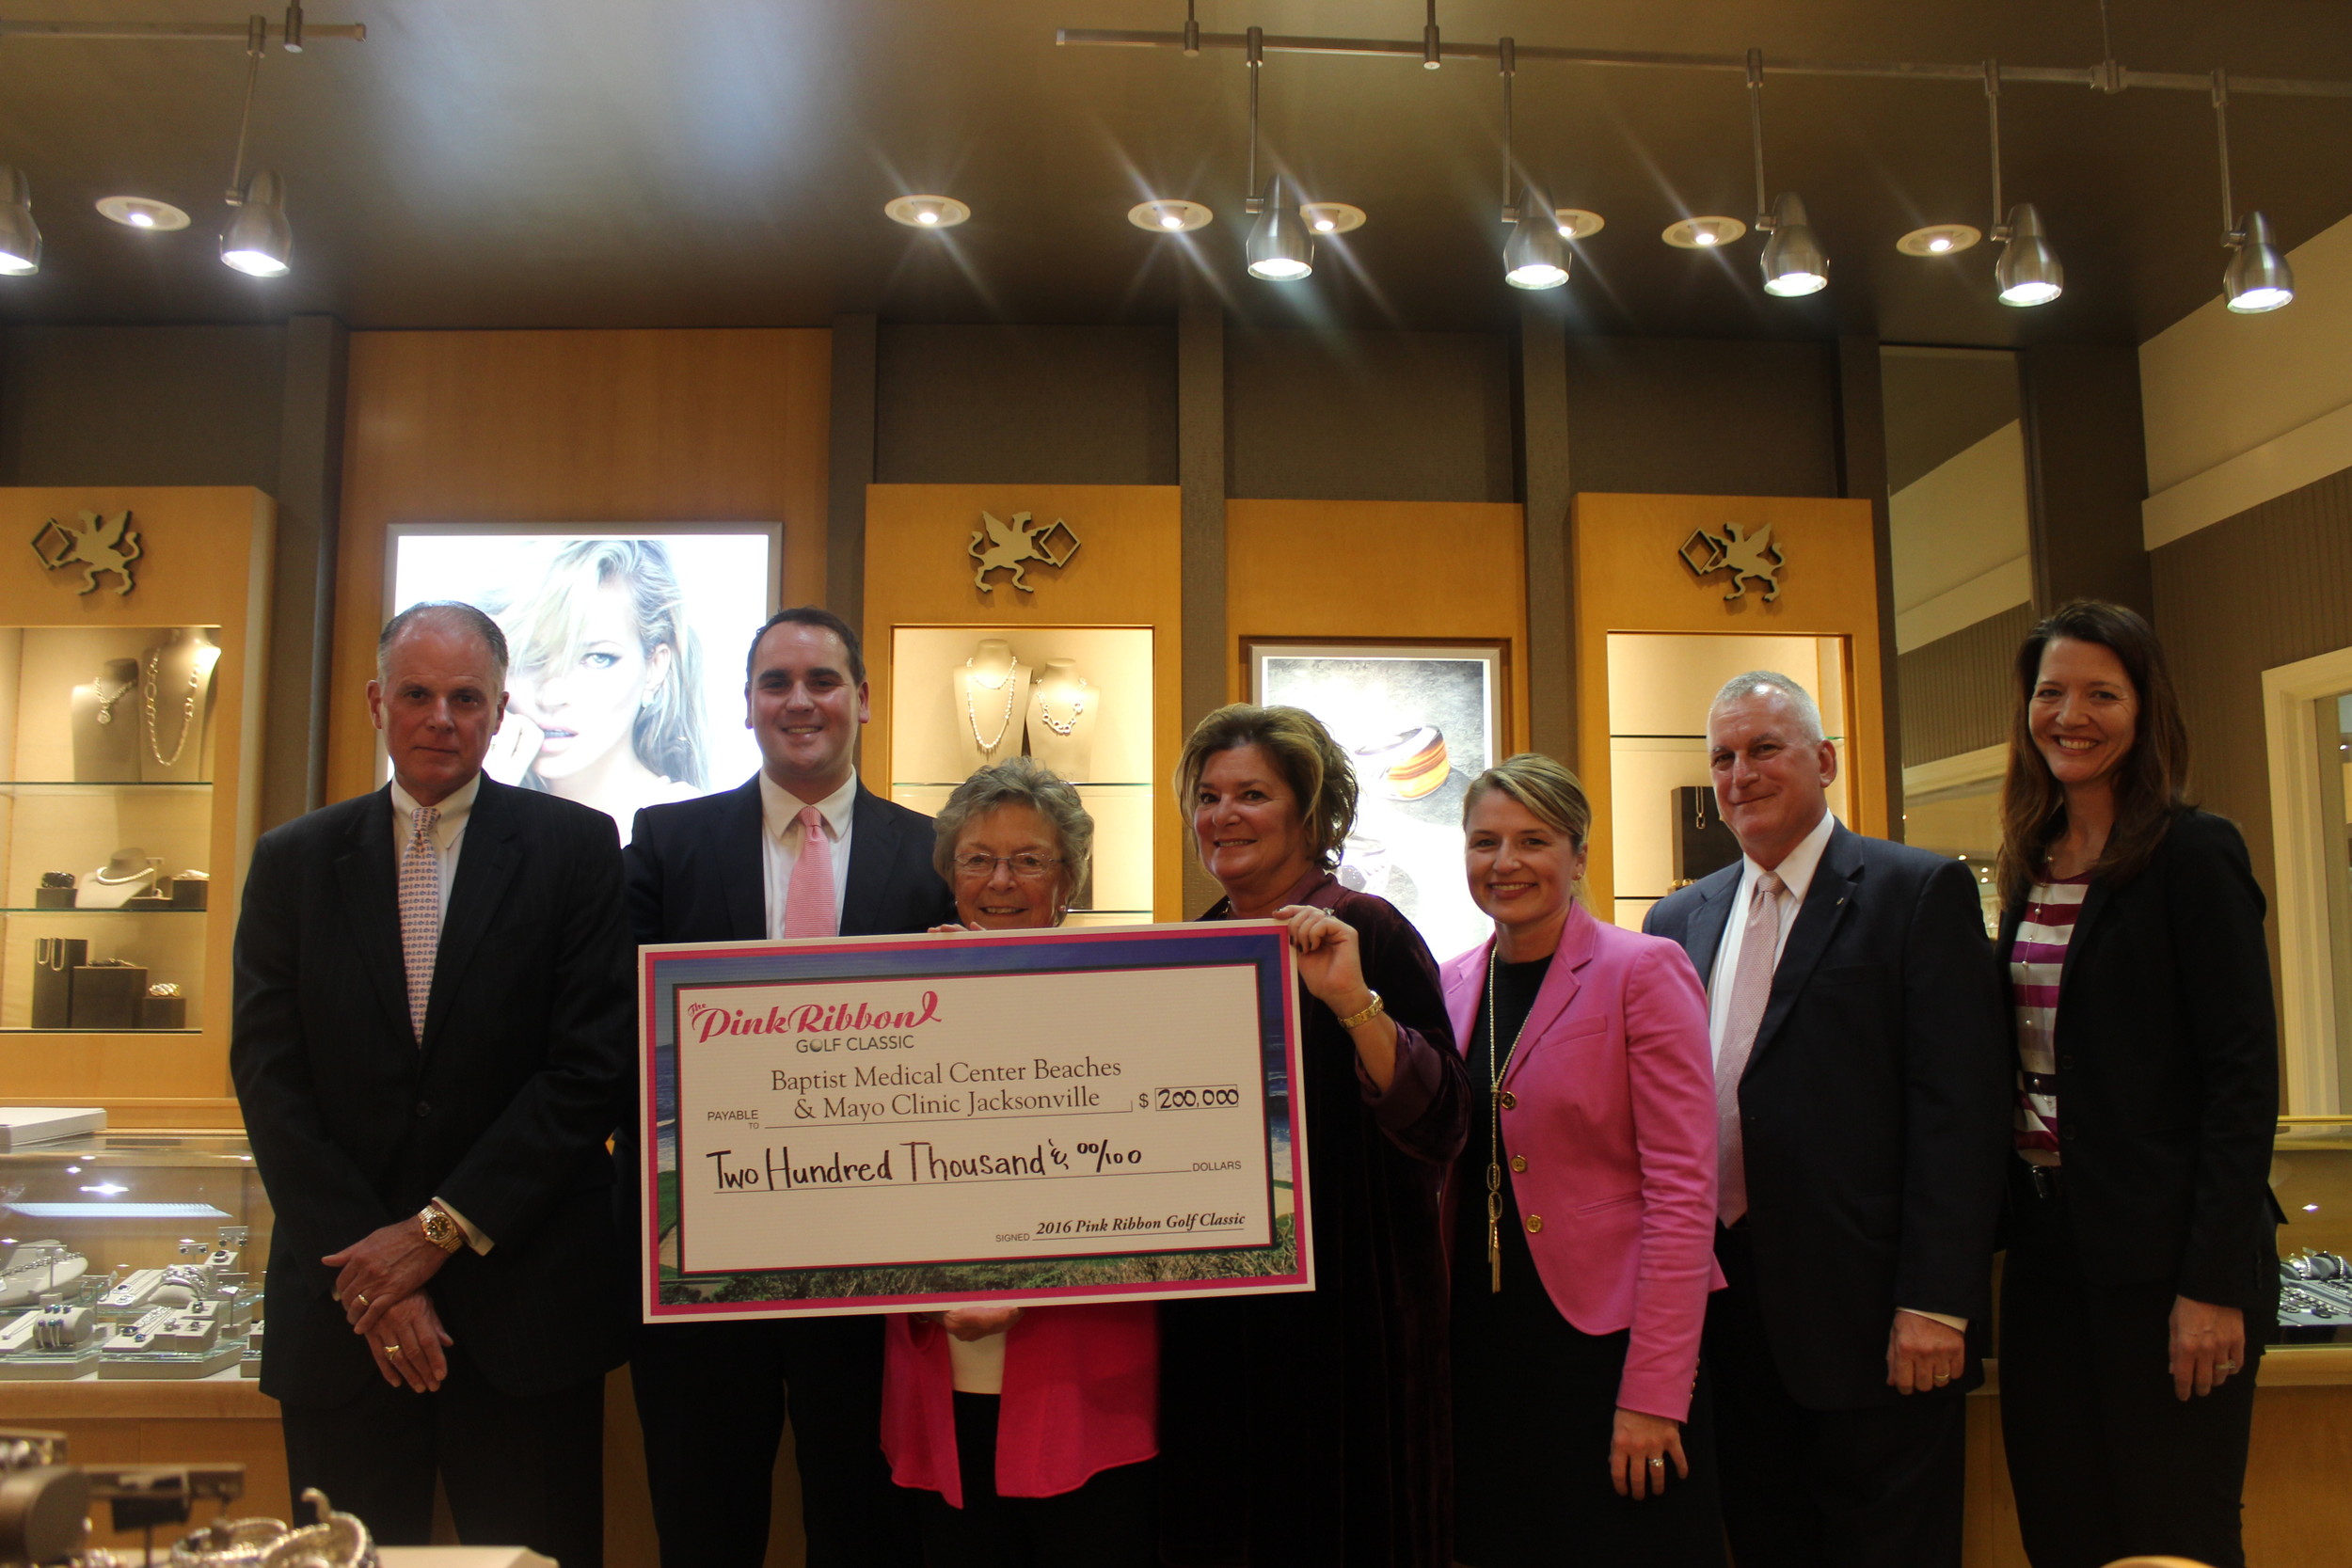 Clayton Bromberg, Jarret Dreicer, Susie Buckey, Christy Bromberg, Dr. Sarah McLaughlin, John Rutkowski and Sarah Smith represent Underwood’s Jewelers, Baptist Medical Center Beaches, the Pink Ribbon Golf Classic and Mayo Clinic-Jacksonville during the check presentation at the John Hardy Trunk Show Nov. 17.